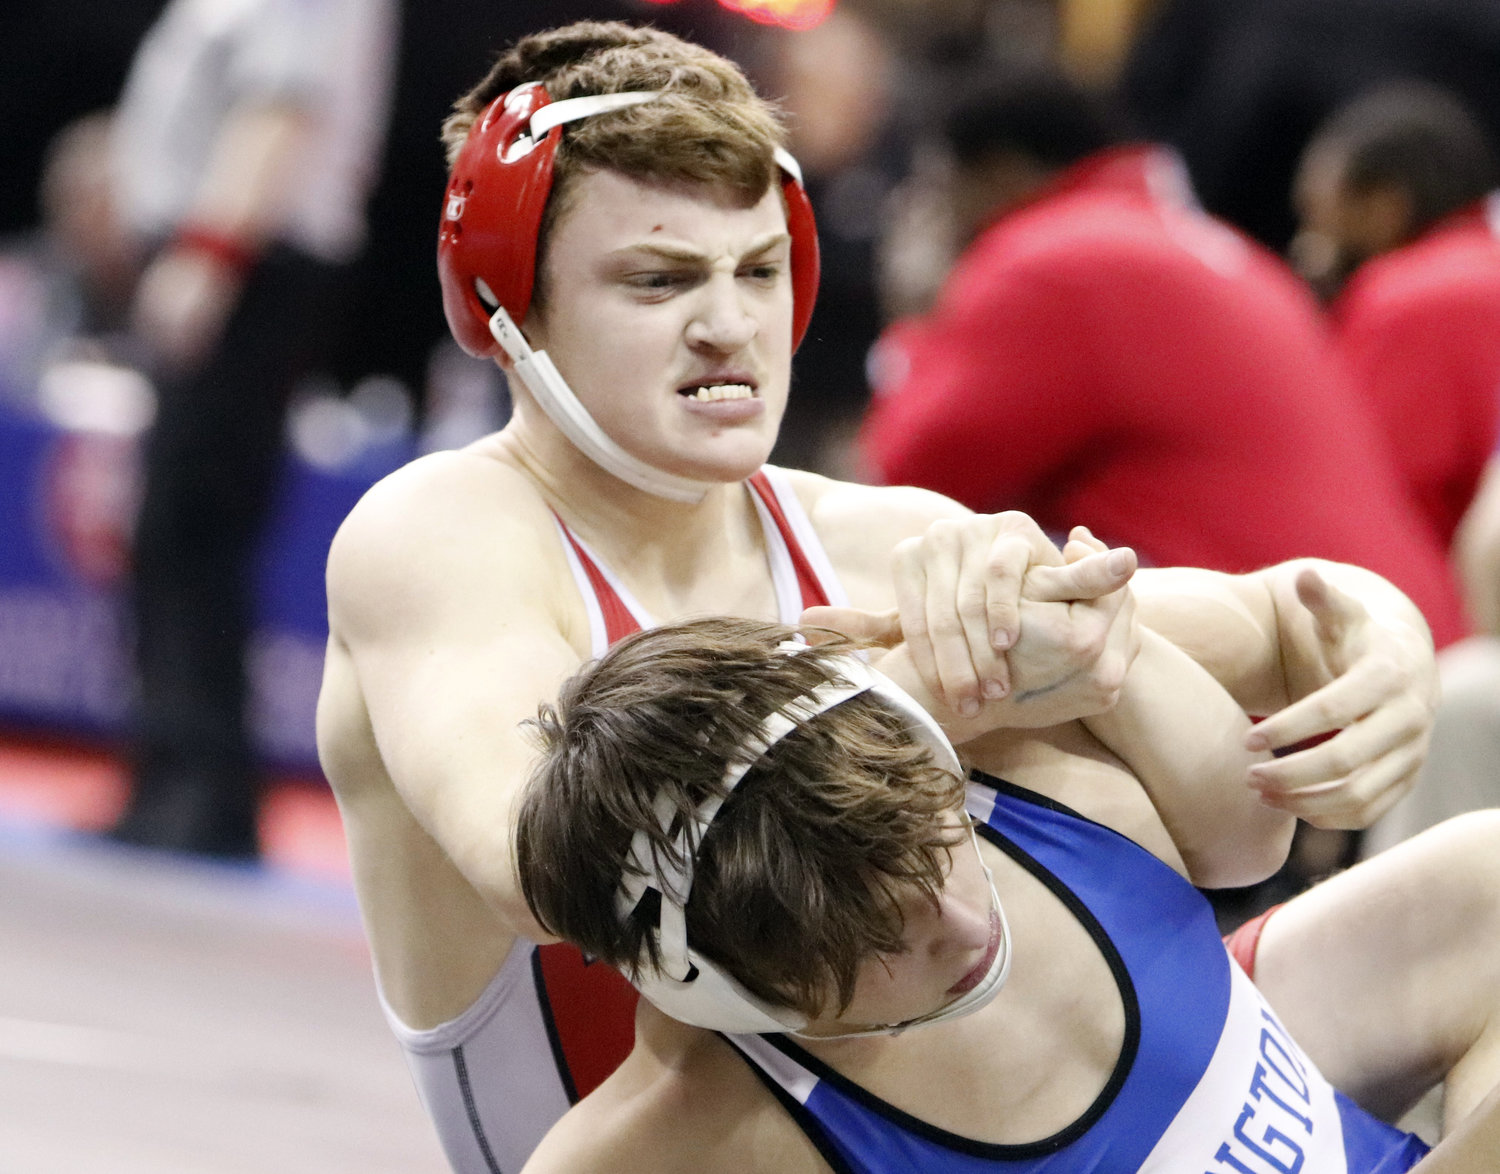 Warrenton wrestler Joshua Kassing (top) controls his match at the Class 3 state wrestling tournament earlier this season.